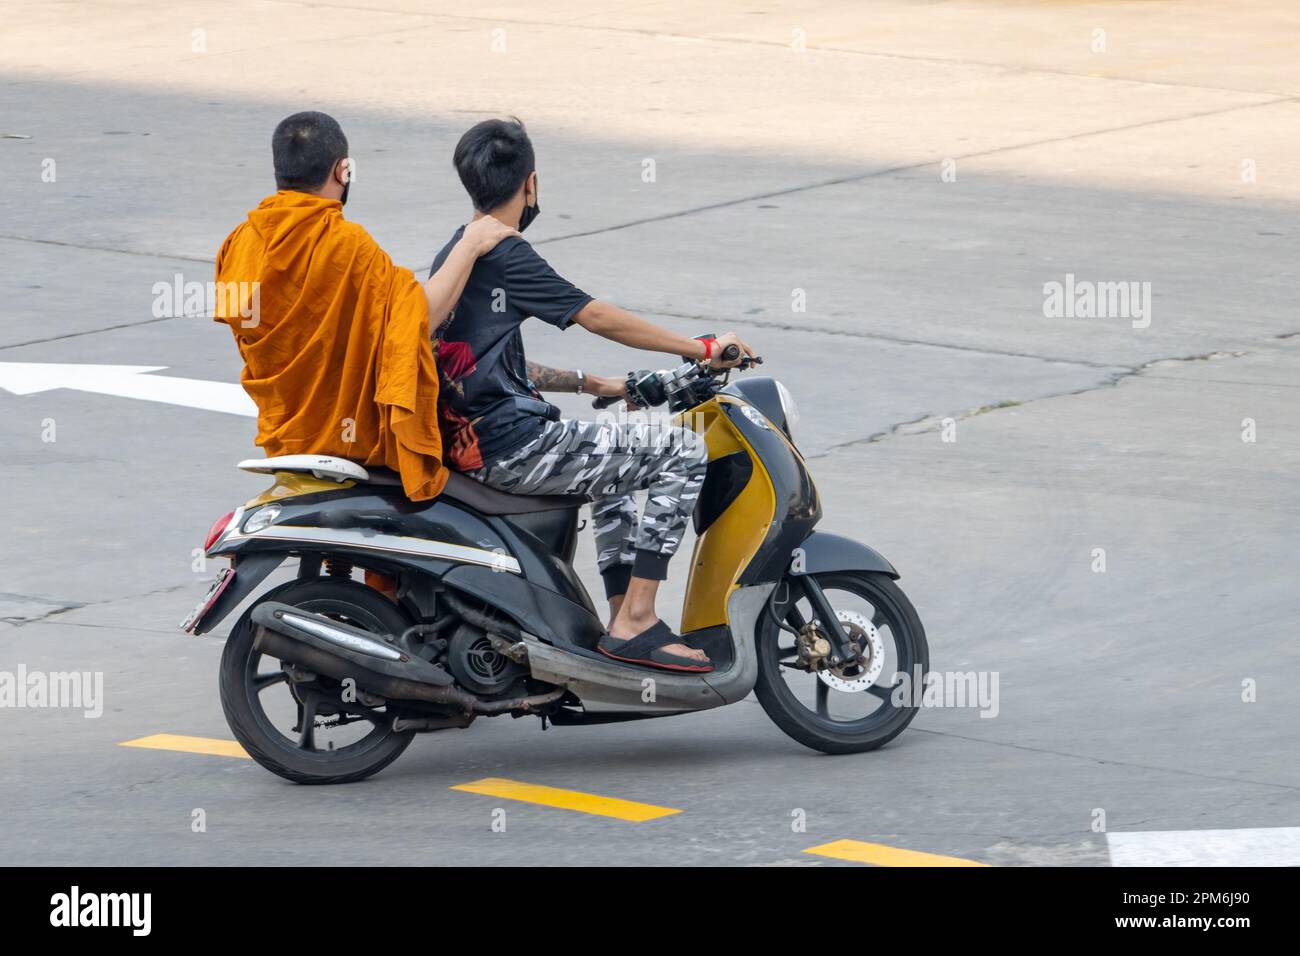 A man rides a motorcycle with a Buddhist monk, Thailand Stock Photo